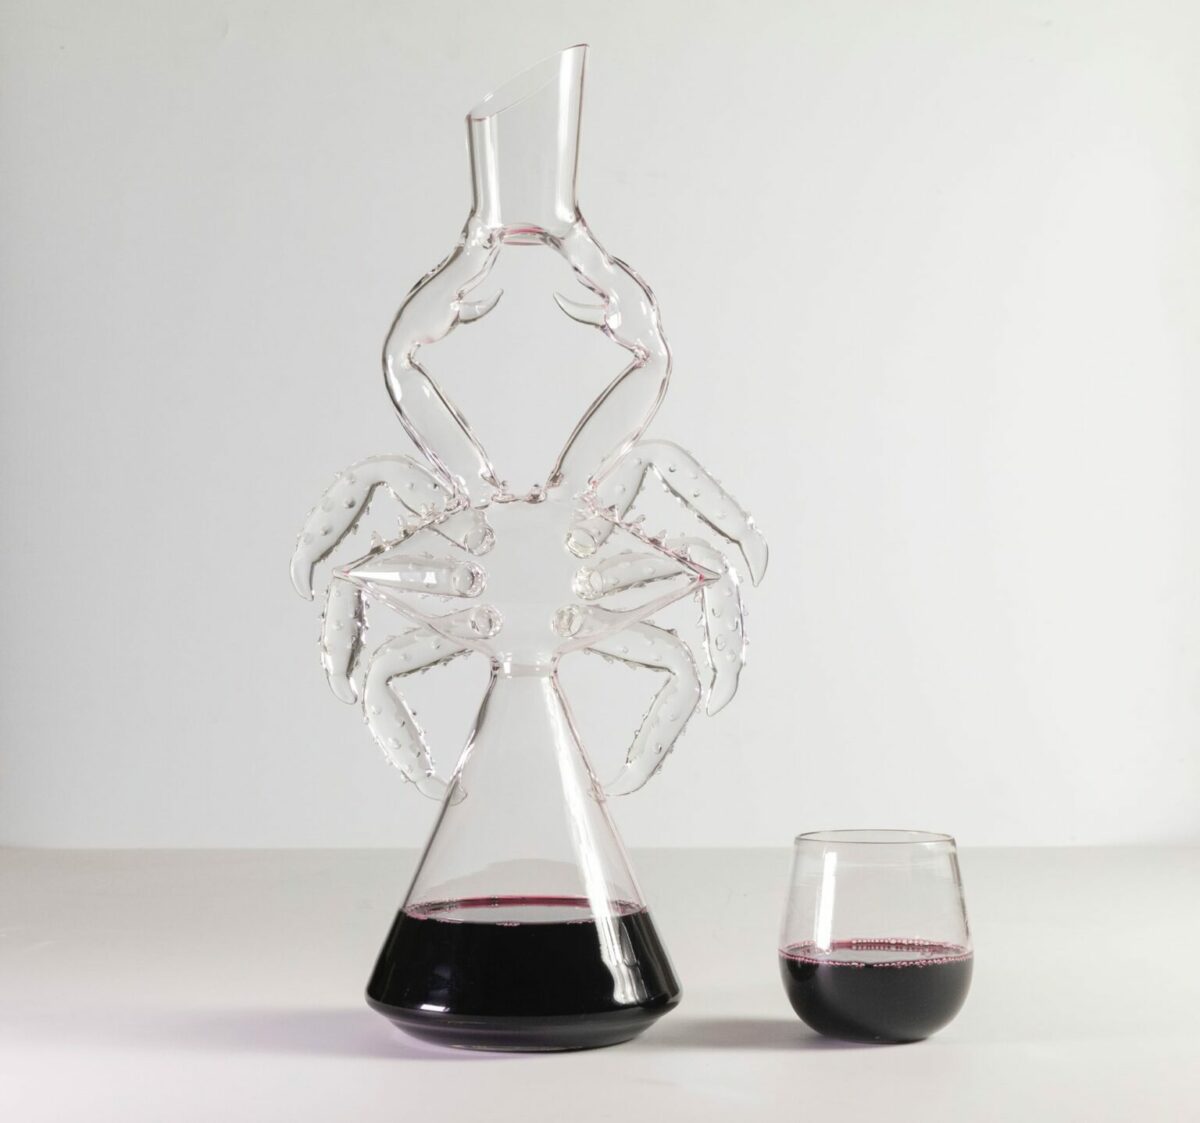 Fantastic sculptural wine decanters in the form of sea creatures by Charlie Matz